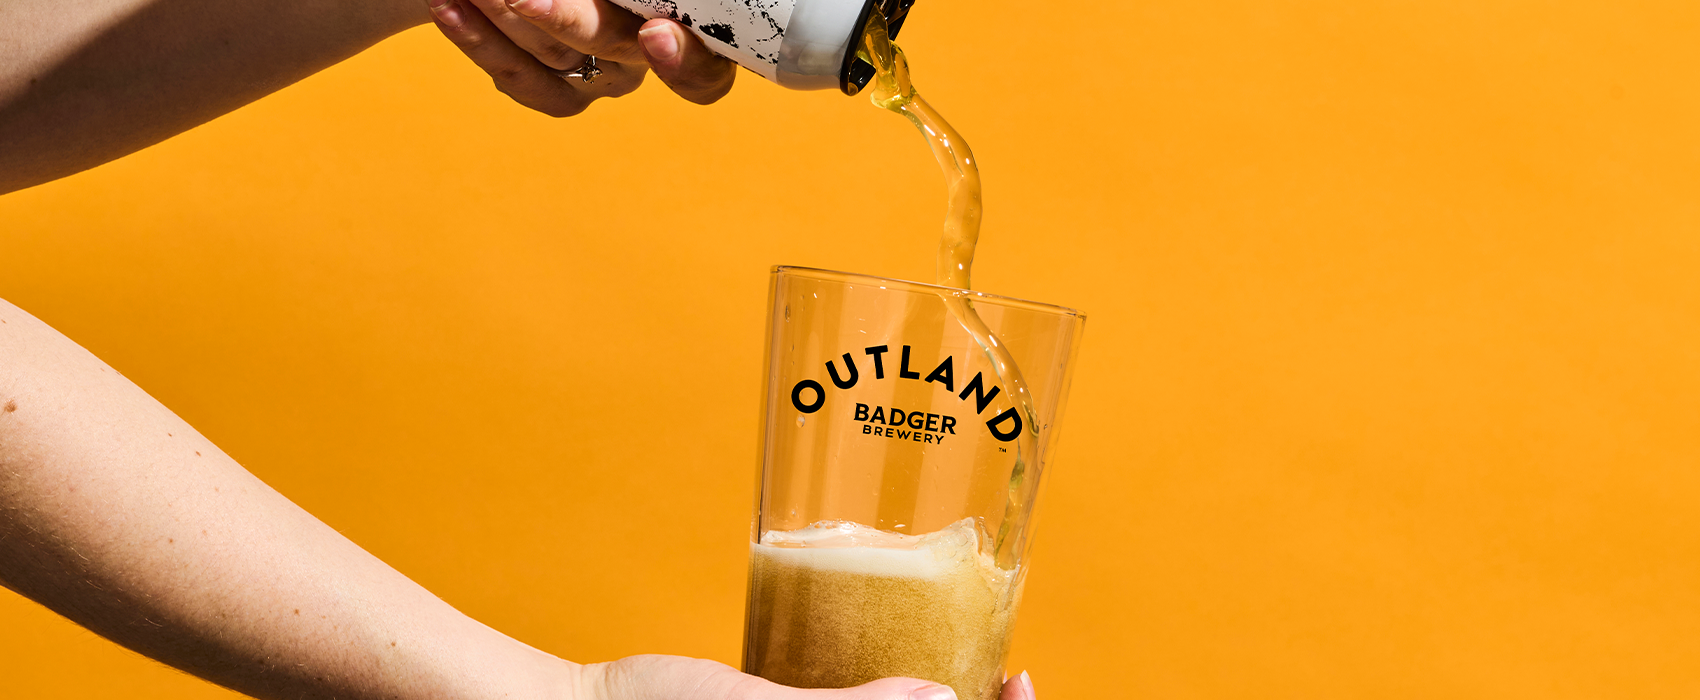 Outland Ginger Pale Ale being poured into Outland pint glass